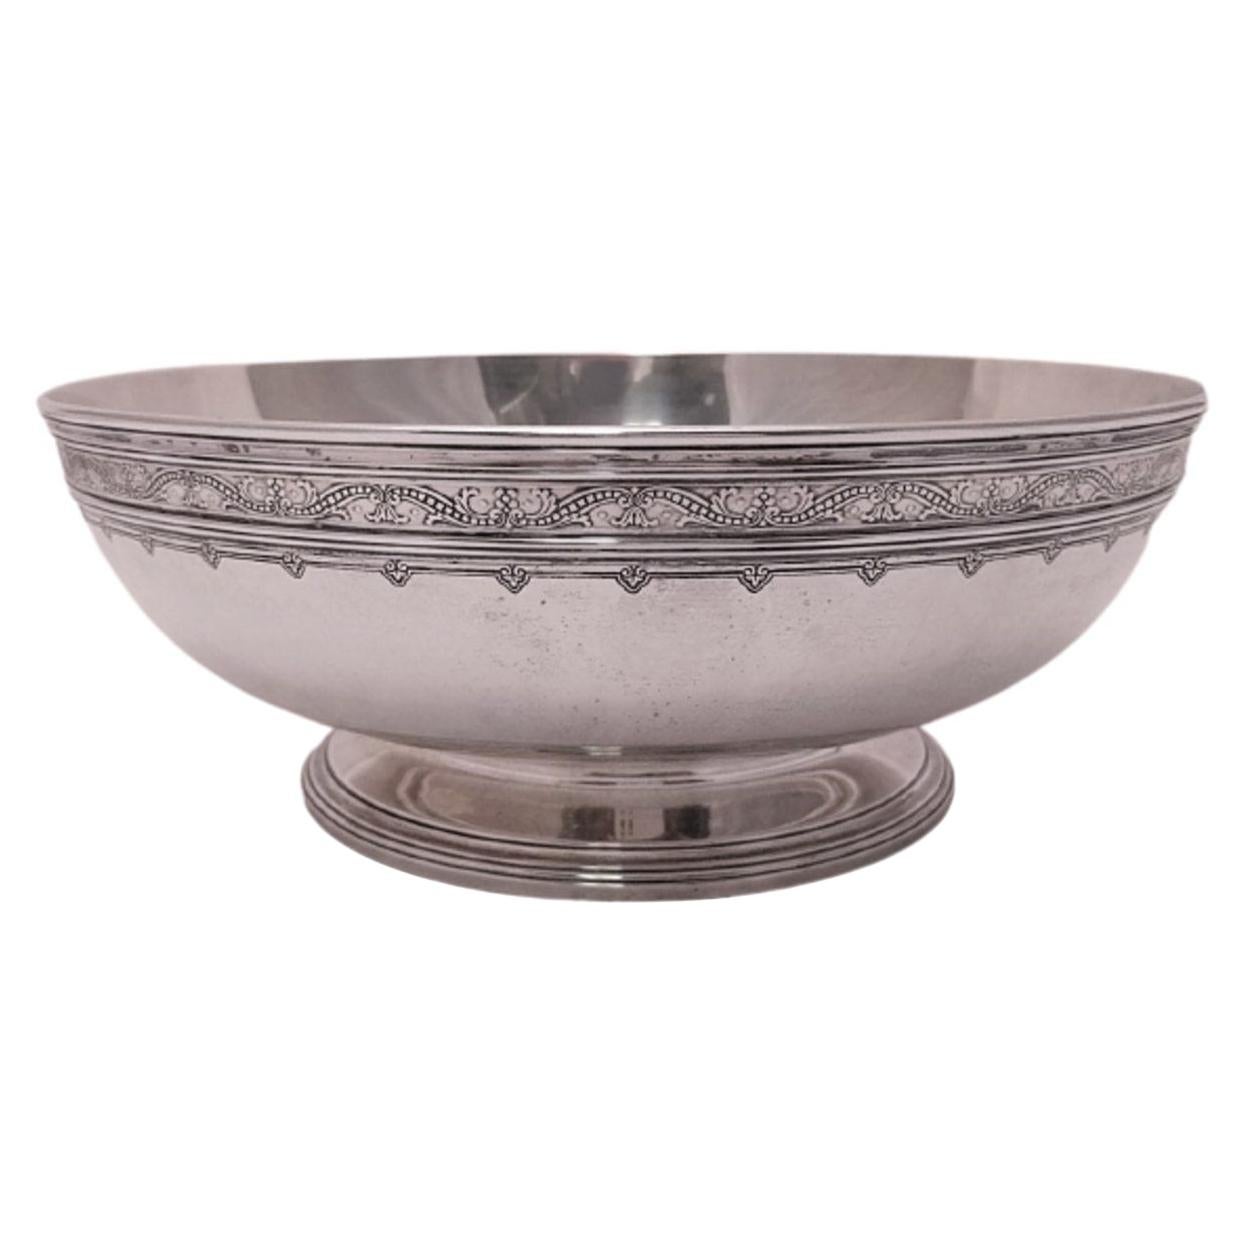 Tiffany & Co. Sterling Silver Centerpiece Bowl from 1914 in Art Deco Style